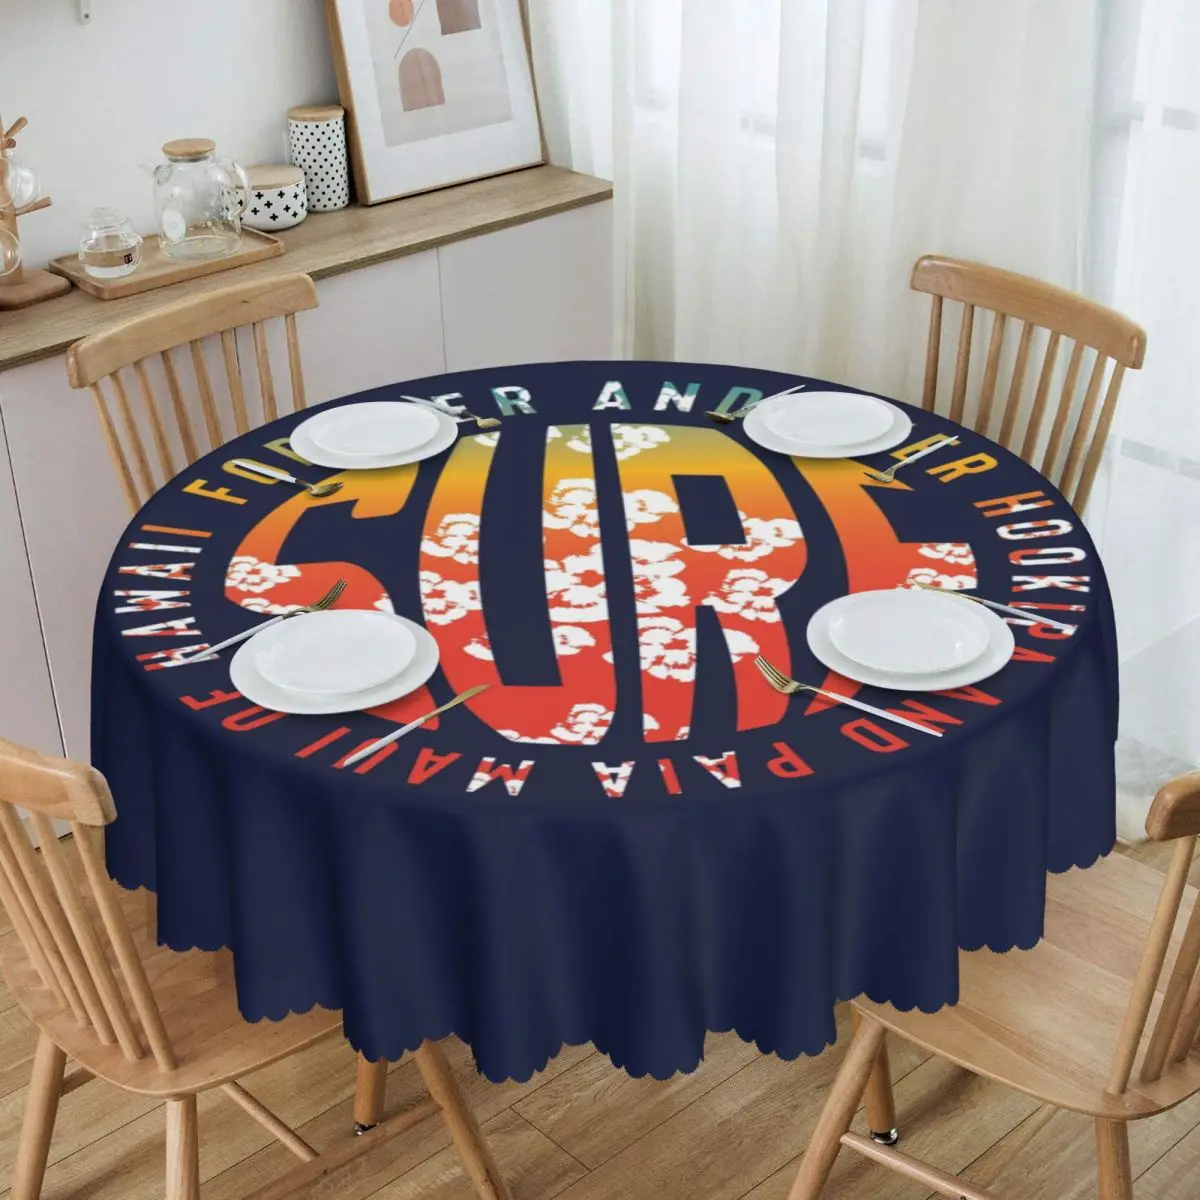 

Funny Surfing Surfer Quotes Round Tablecloths 60 Inches Table Covers for Dining Table Cloth